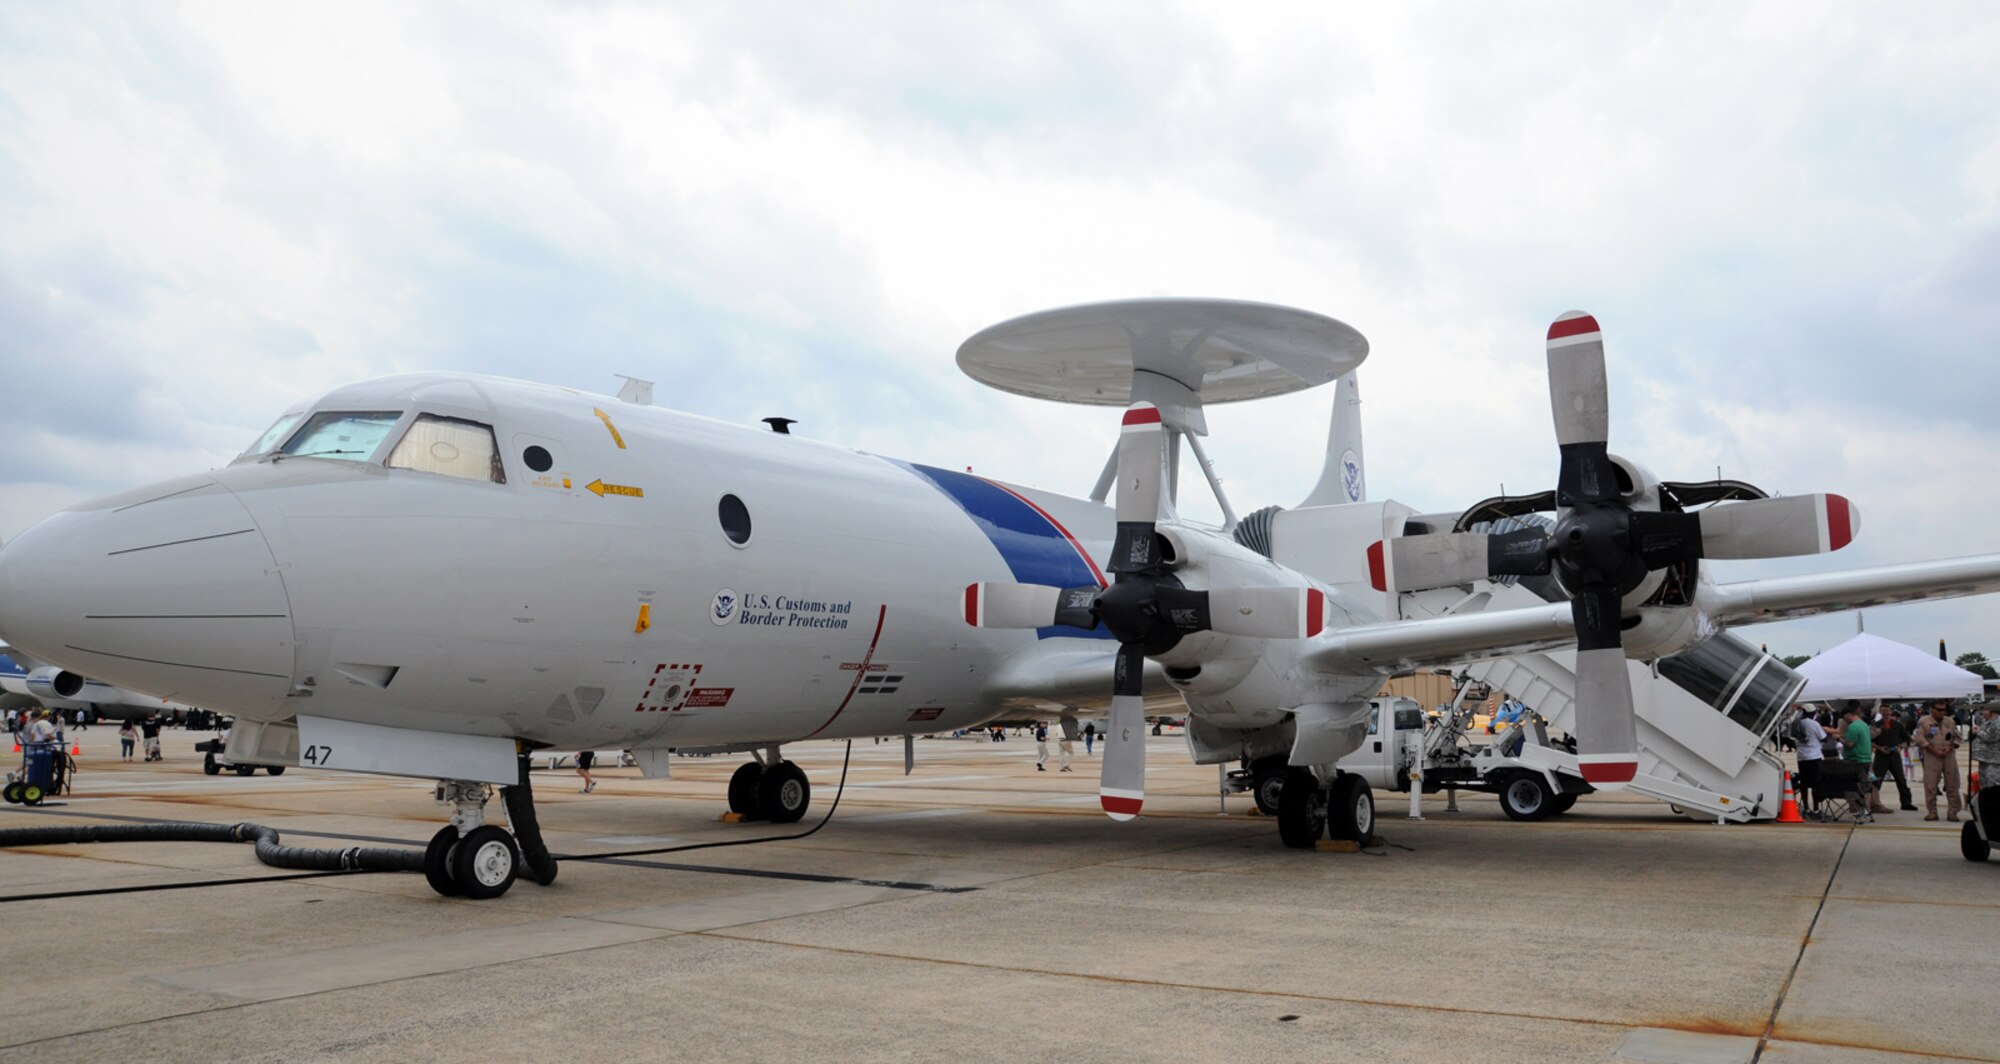 The Orion P-3 Airborne Early Warning Detection and Monitoring aircraft showcases the terrorist-fighting capabilities of the American flying military at the 2011 Joint Service Open House at Joint Base Andrews, Md., May 20. The 2011 JSOH affords the public an opportunity to meet the men and women of the Armed Forces and to see military equipment through the efforts of active duty, guard and reserve servicemembers, as well as civilian employees, retirees and family members. (U.S. Air Force photo by Airman 1st Class Lindsey A. Beadle)